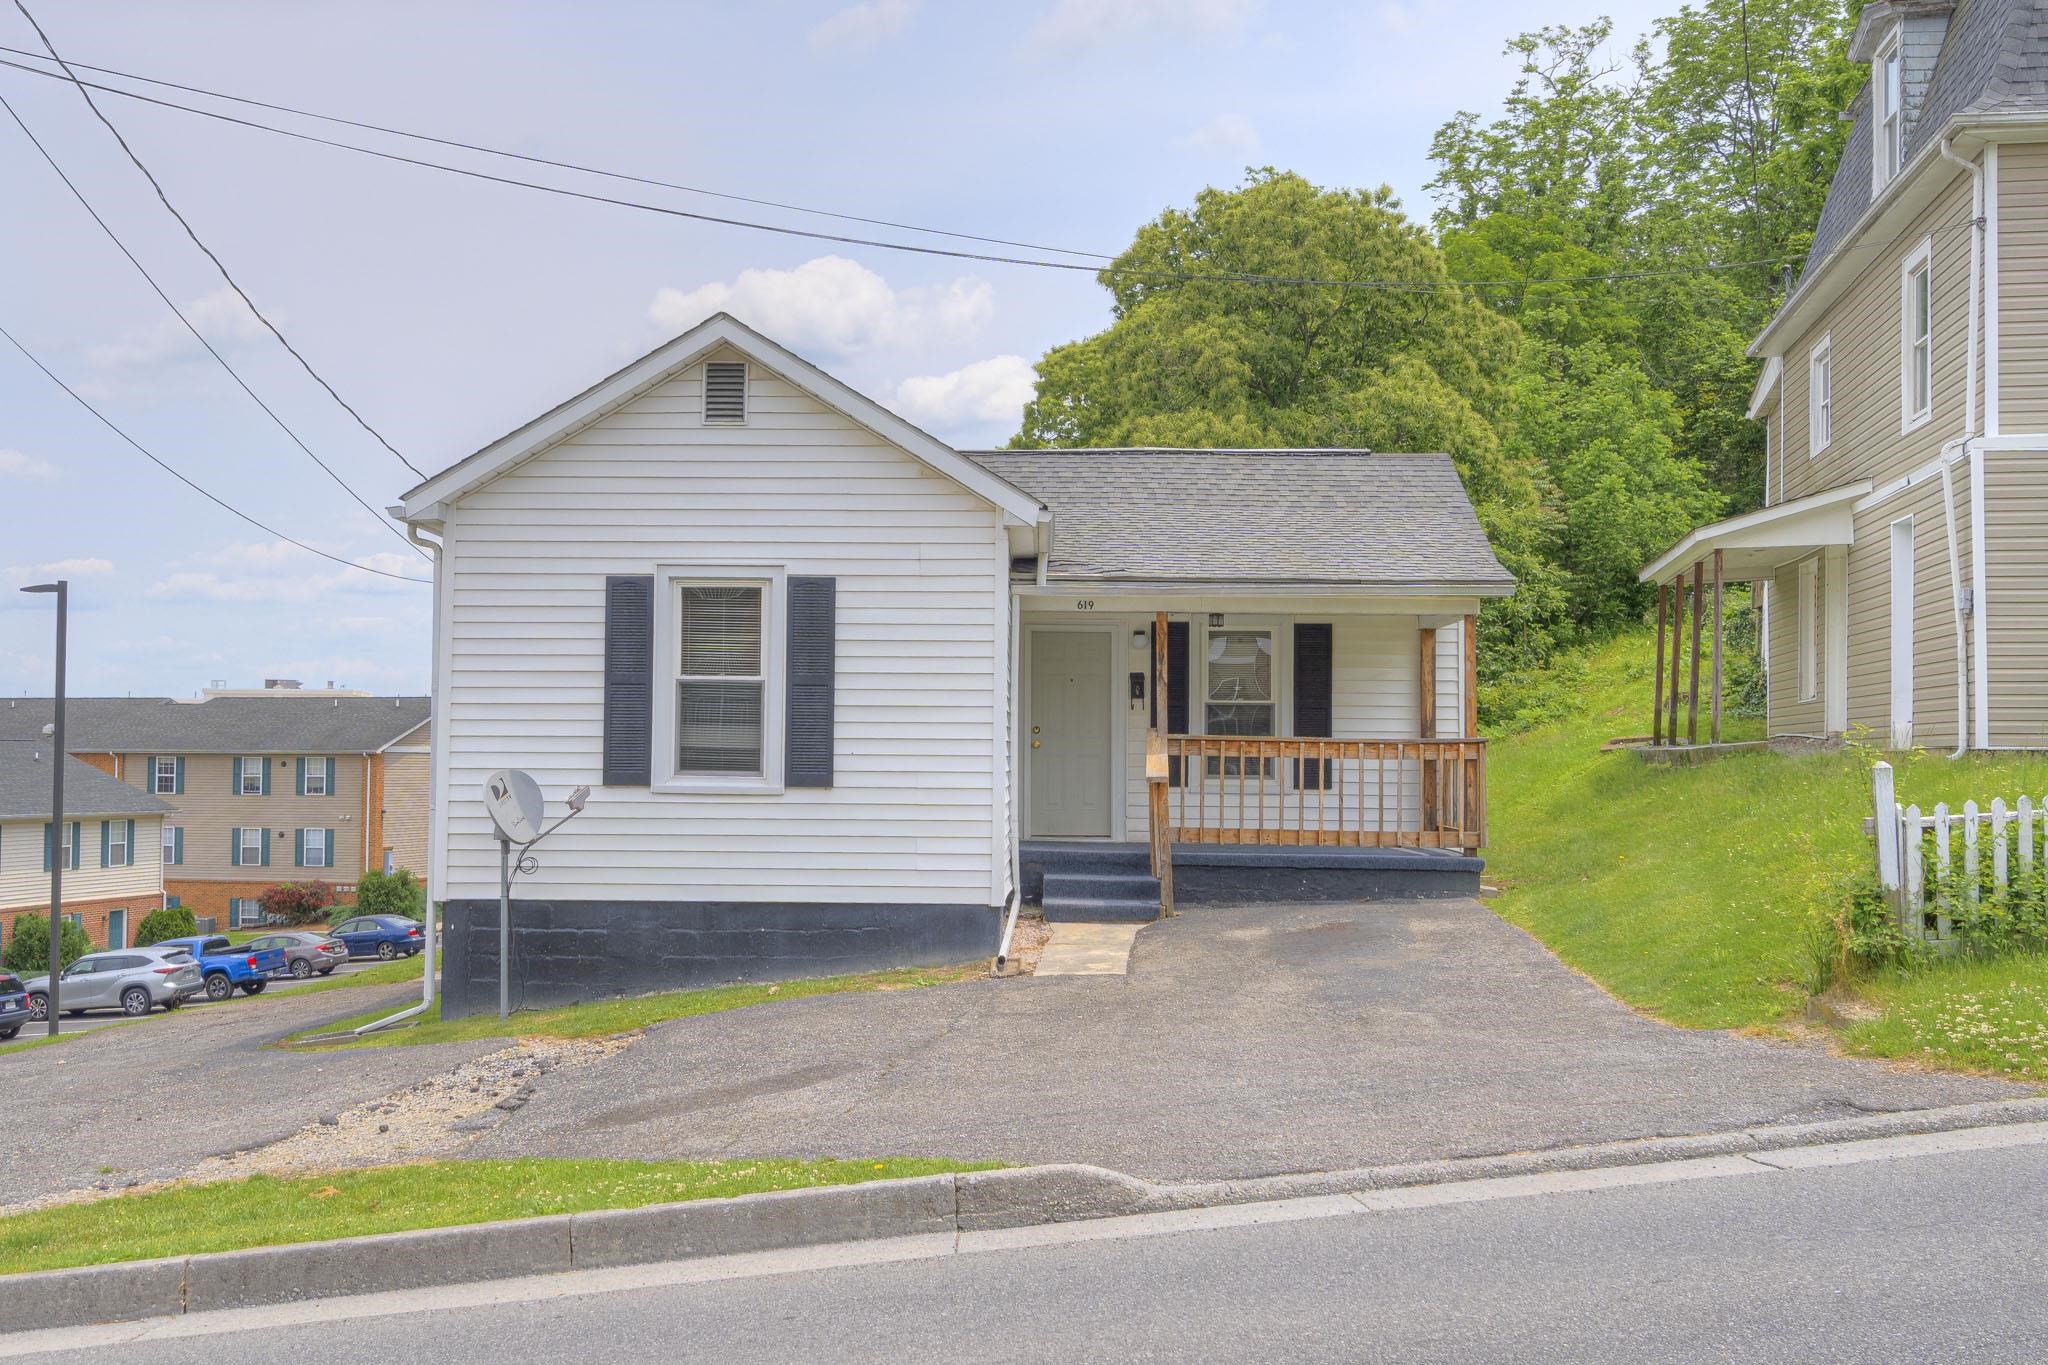 Attention investors! Presenting an excellent investment opportunity that has a strong rental history. 619 Second Avenue is located within 1.5 blocks walking distance to Radford University and provides a steady income stream. Property is rented for the next 2024-2025 school year beginning on May 24th, 2024. Call today for a showing!